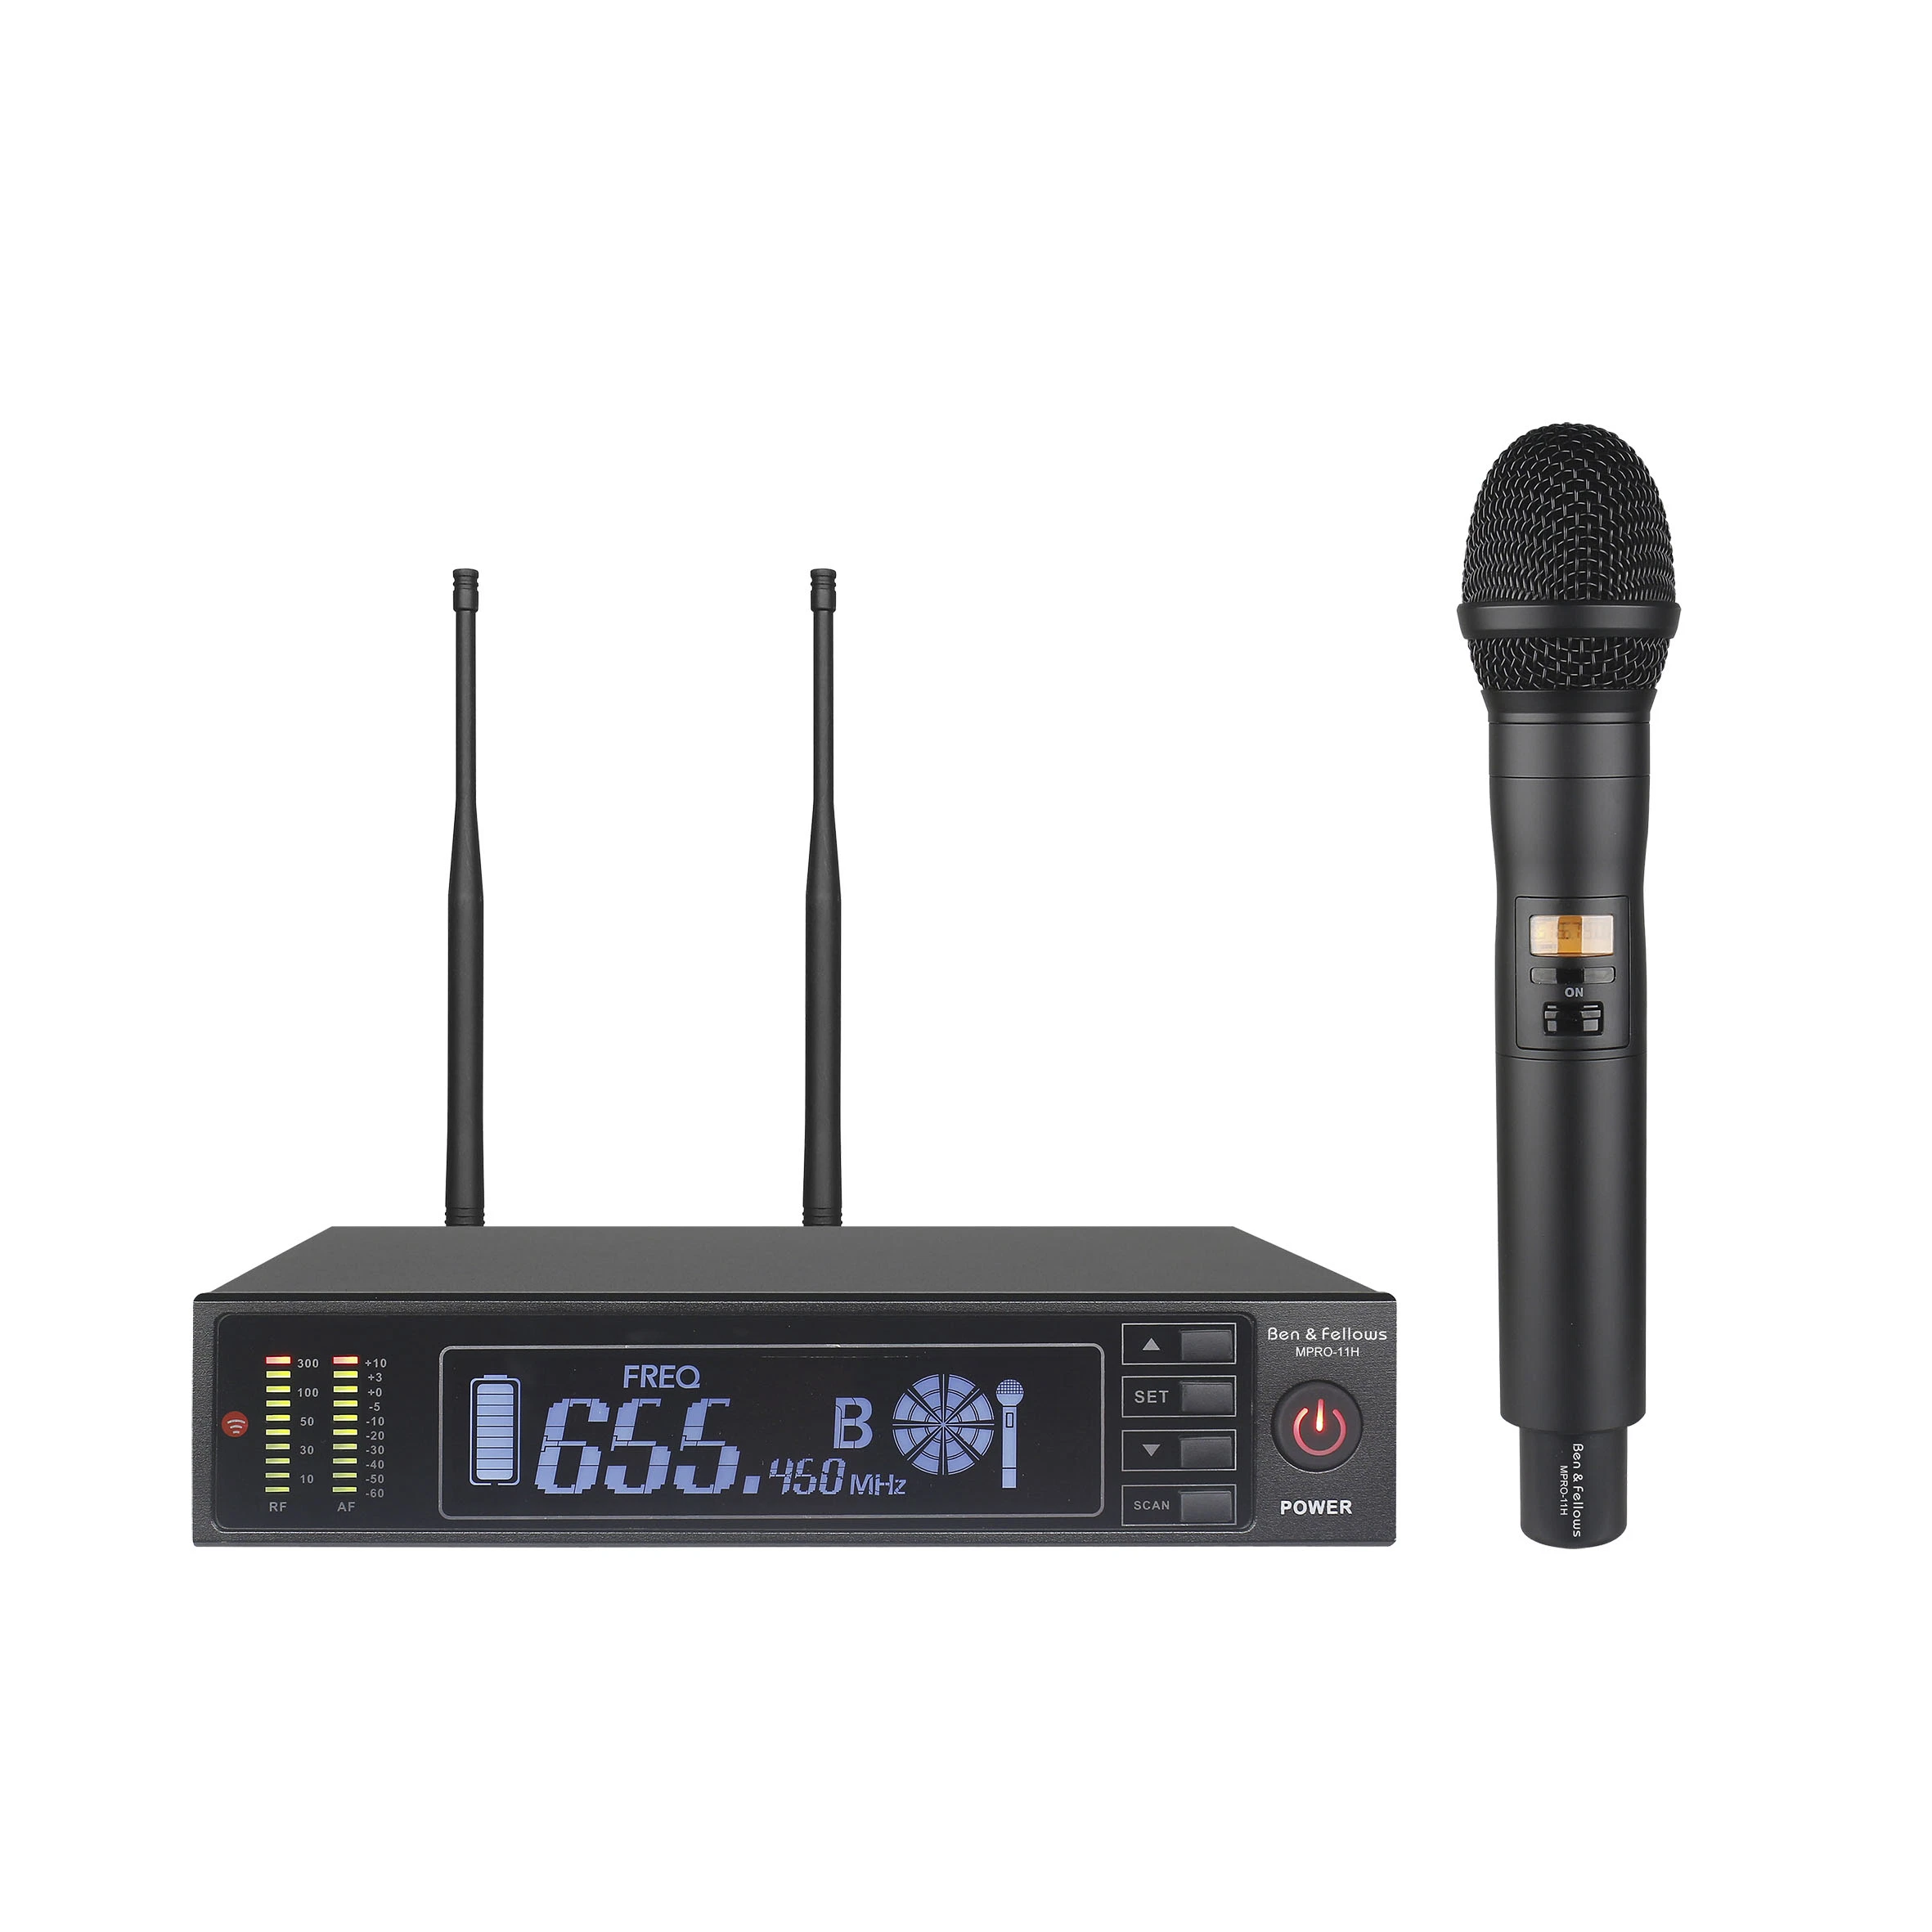 Professional Single Channel Wireless Handheld Microphone with Wideband FM for Karaoke KTV